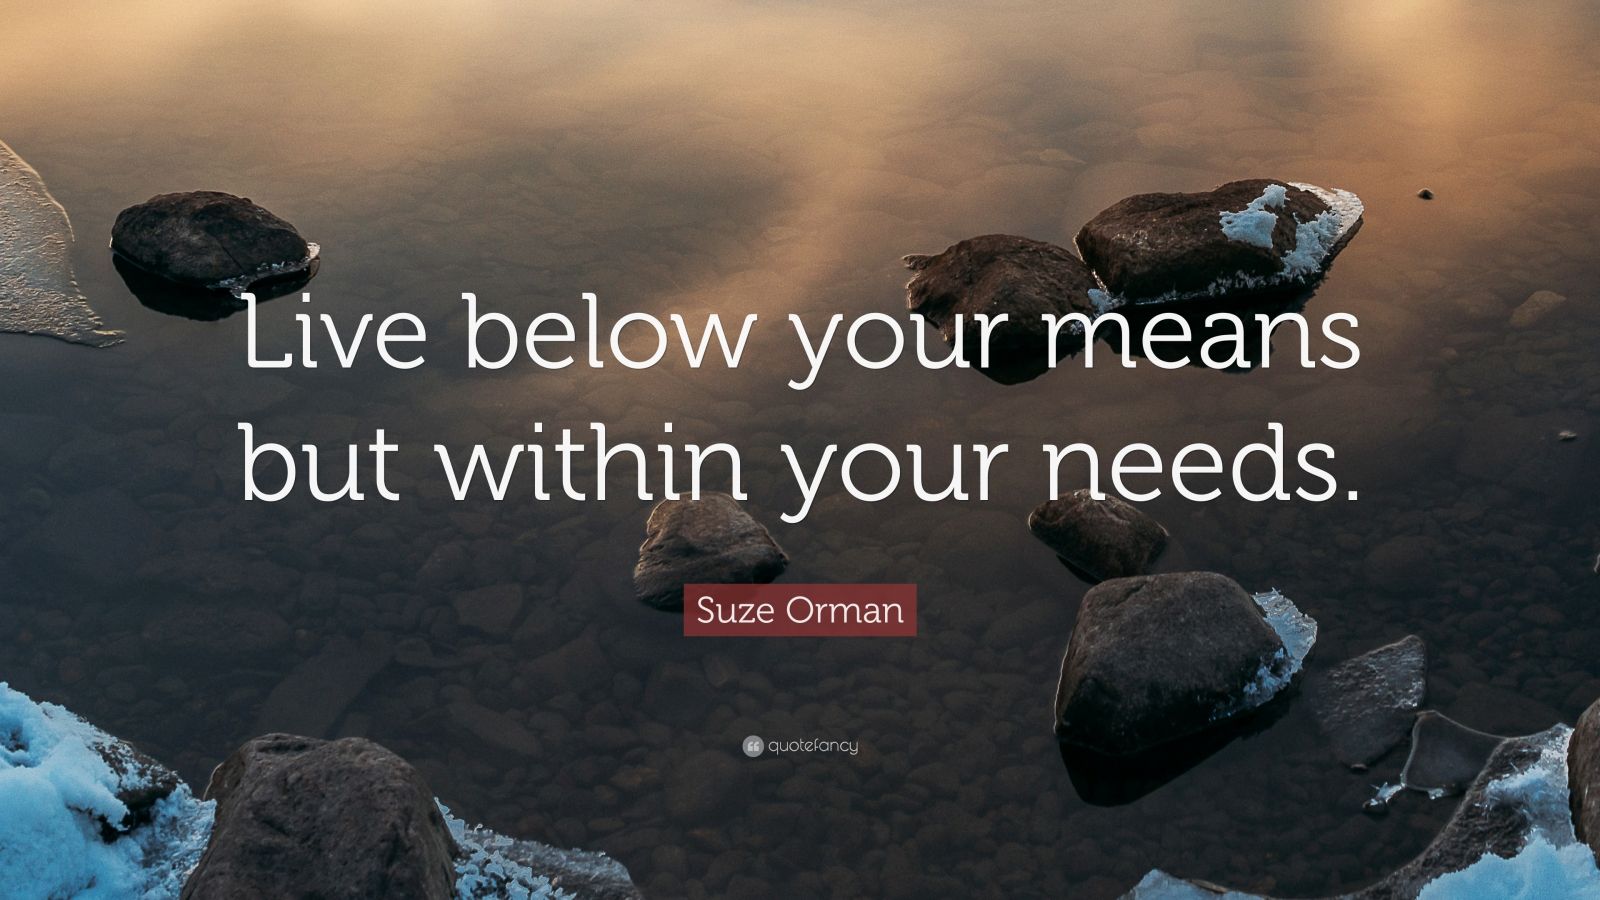 Suze Orman Quote “Live below your means but within your needs.” (9